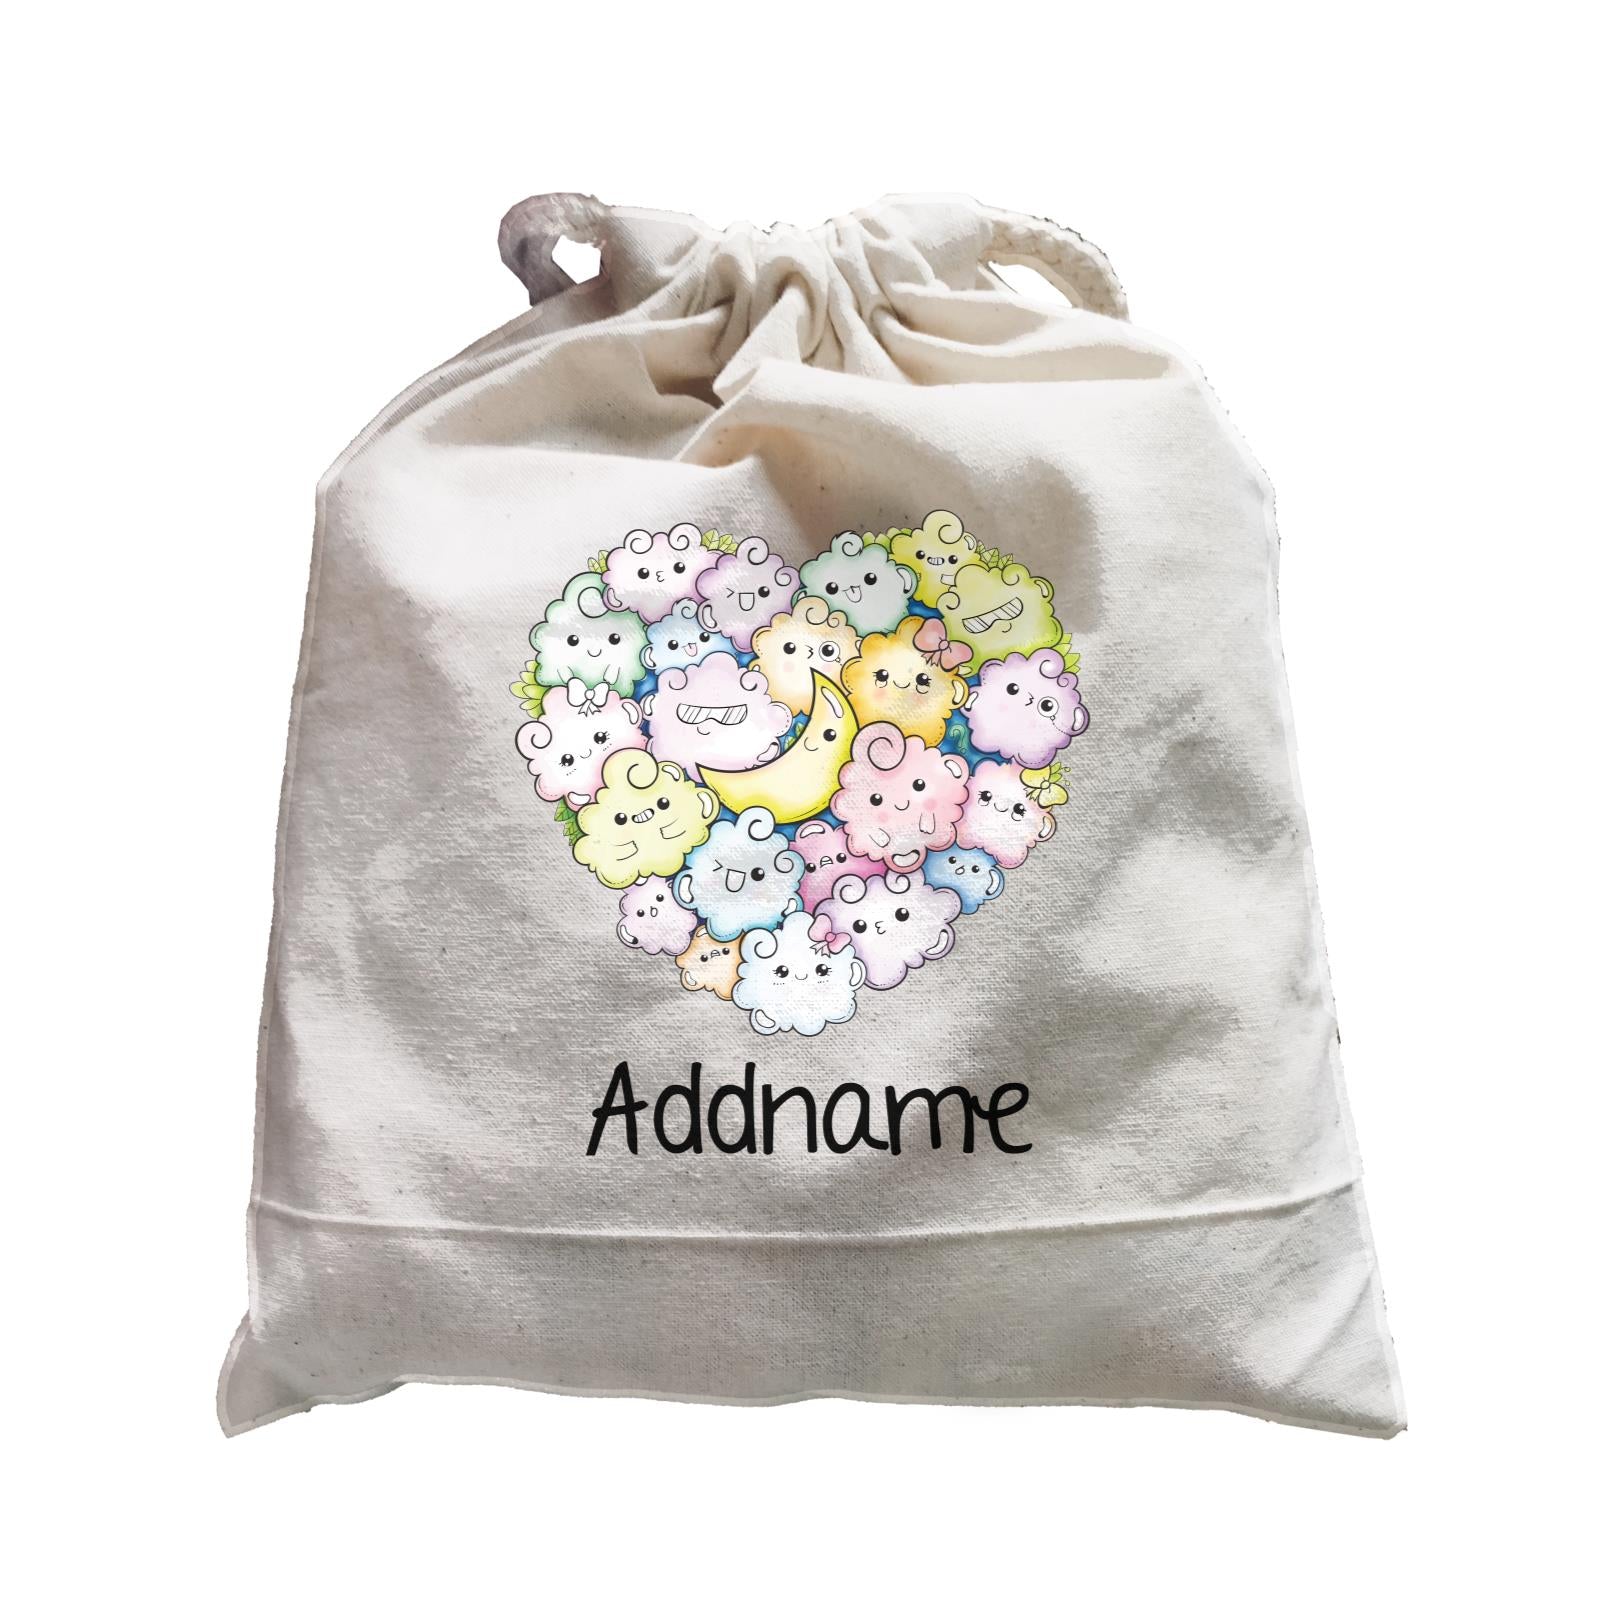 Cute Animals And Friends Series Cute Little Cloud Group Heart Addname Satchel